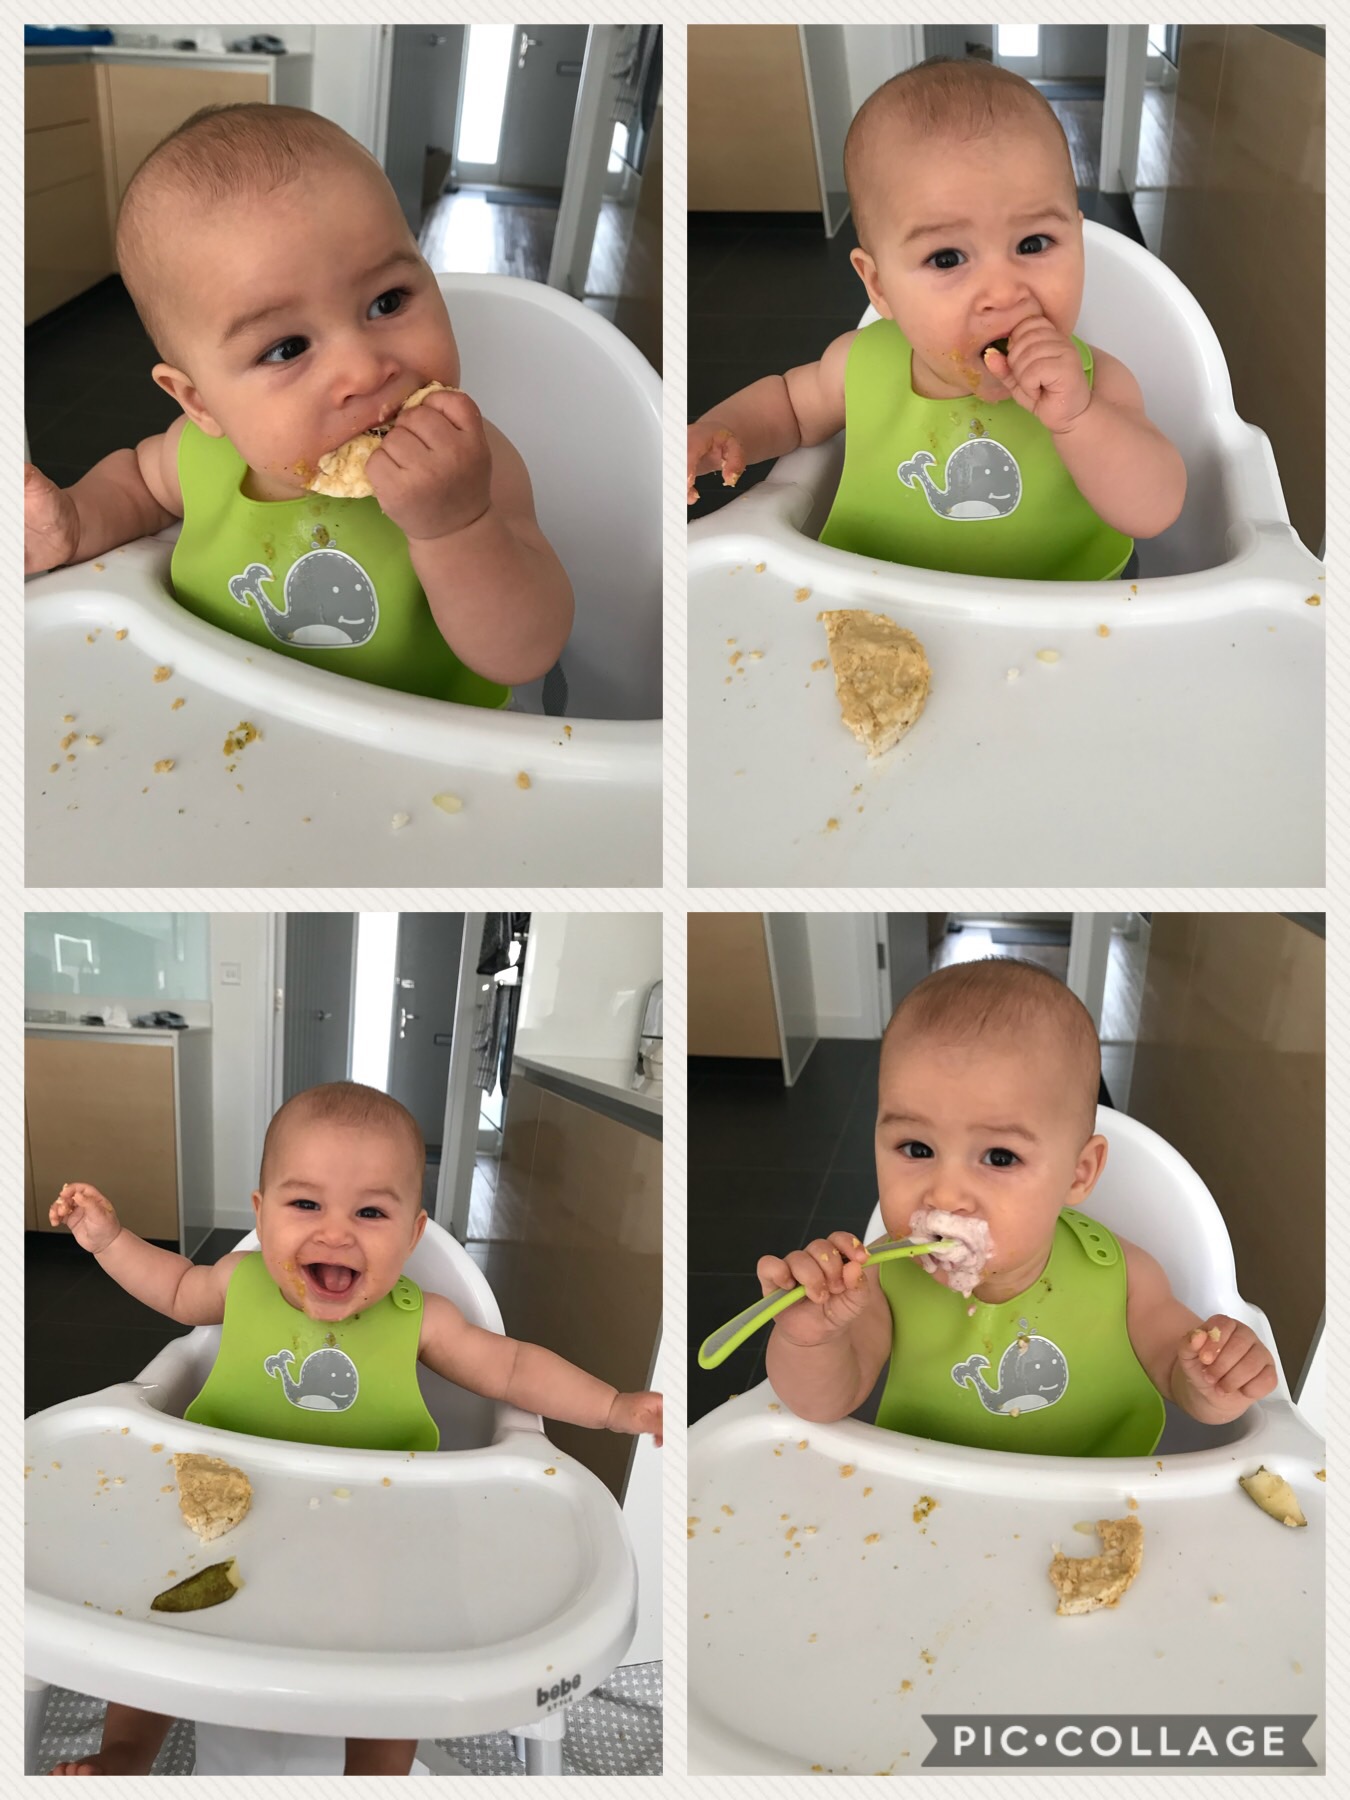 I am still getting used to the gagging, but Leo 6mo seems so unphased